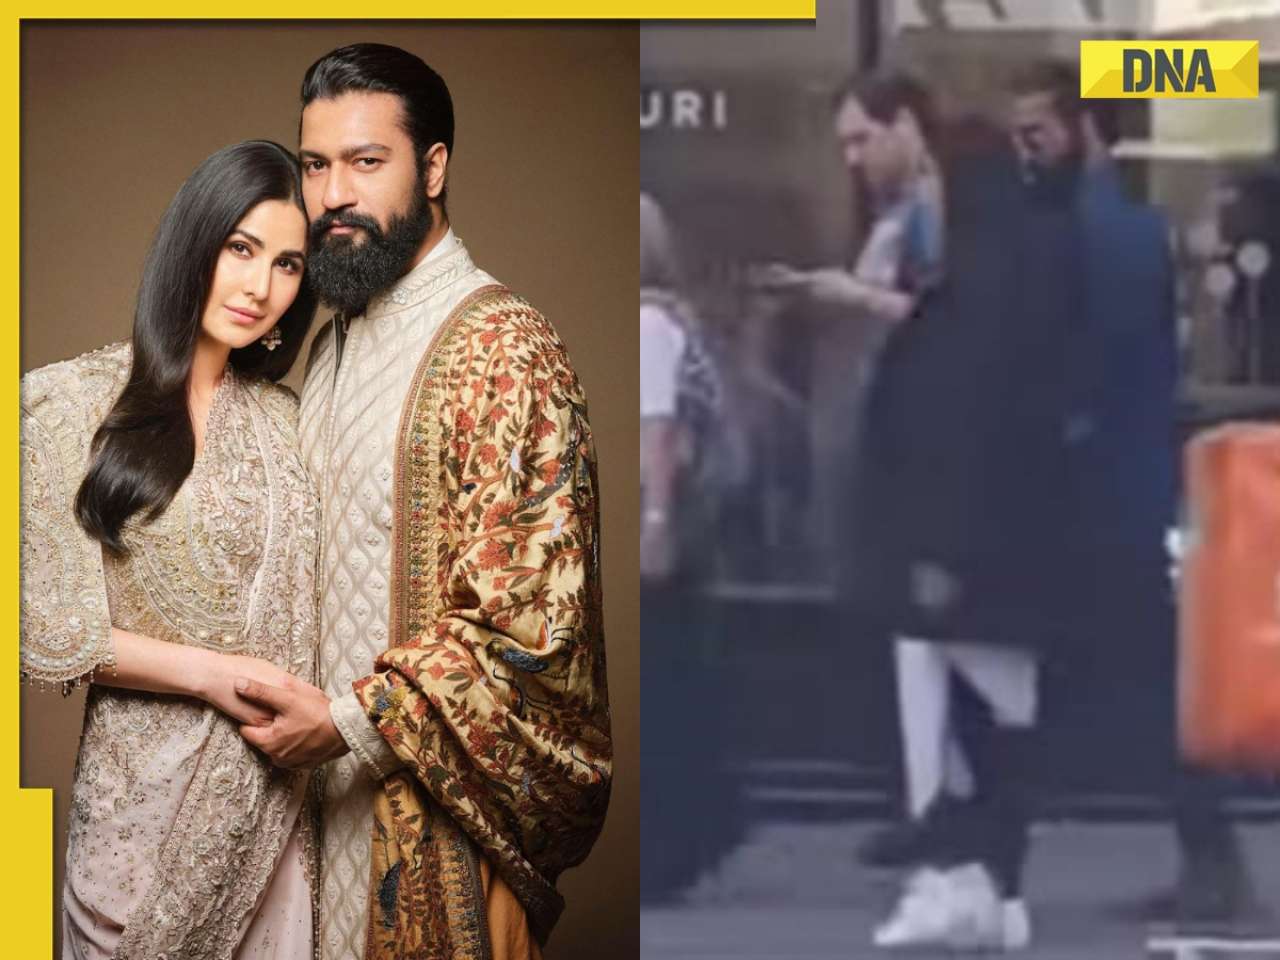 'Pregnant for sure': Katrina Kaif, Vicky Kaushal's viral video from London sparks pregnancy speculations 